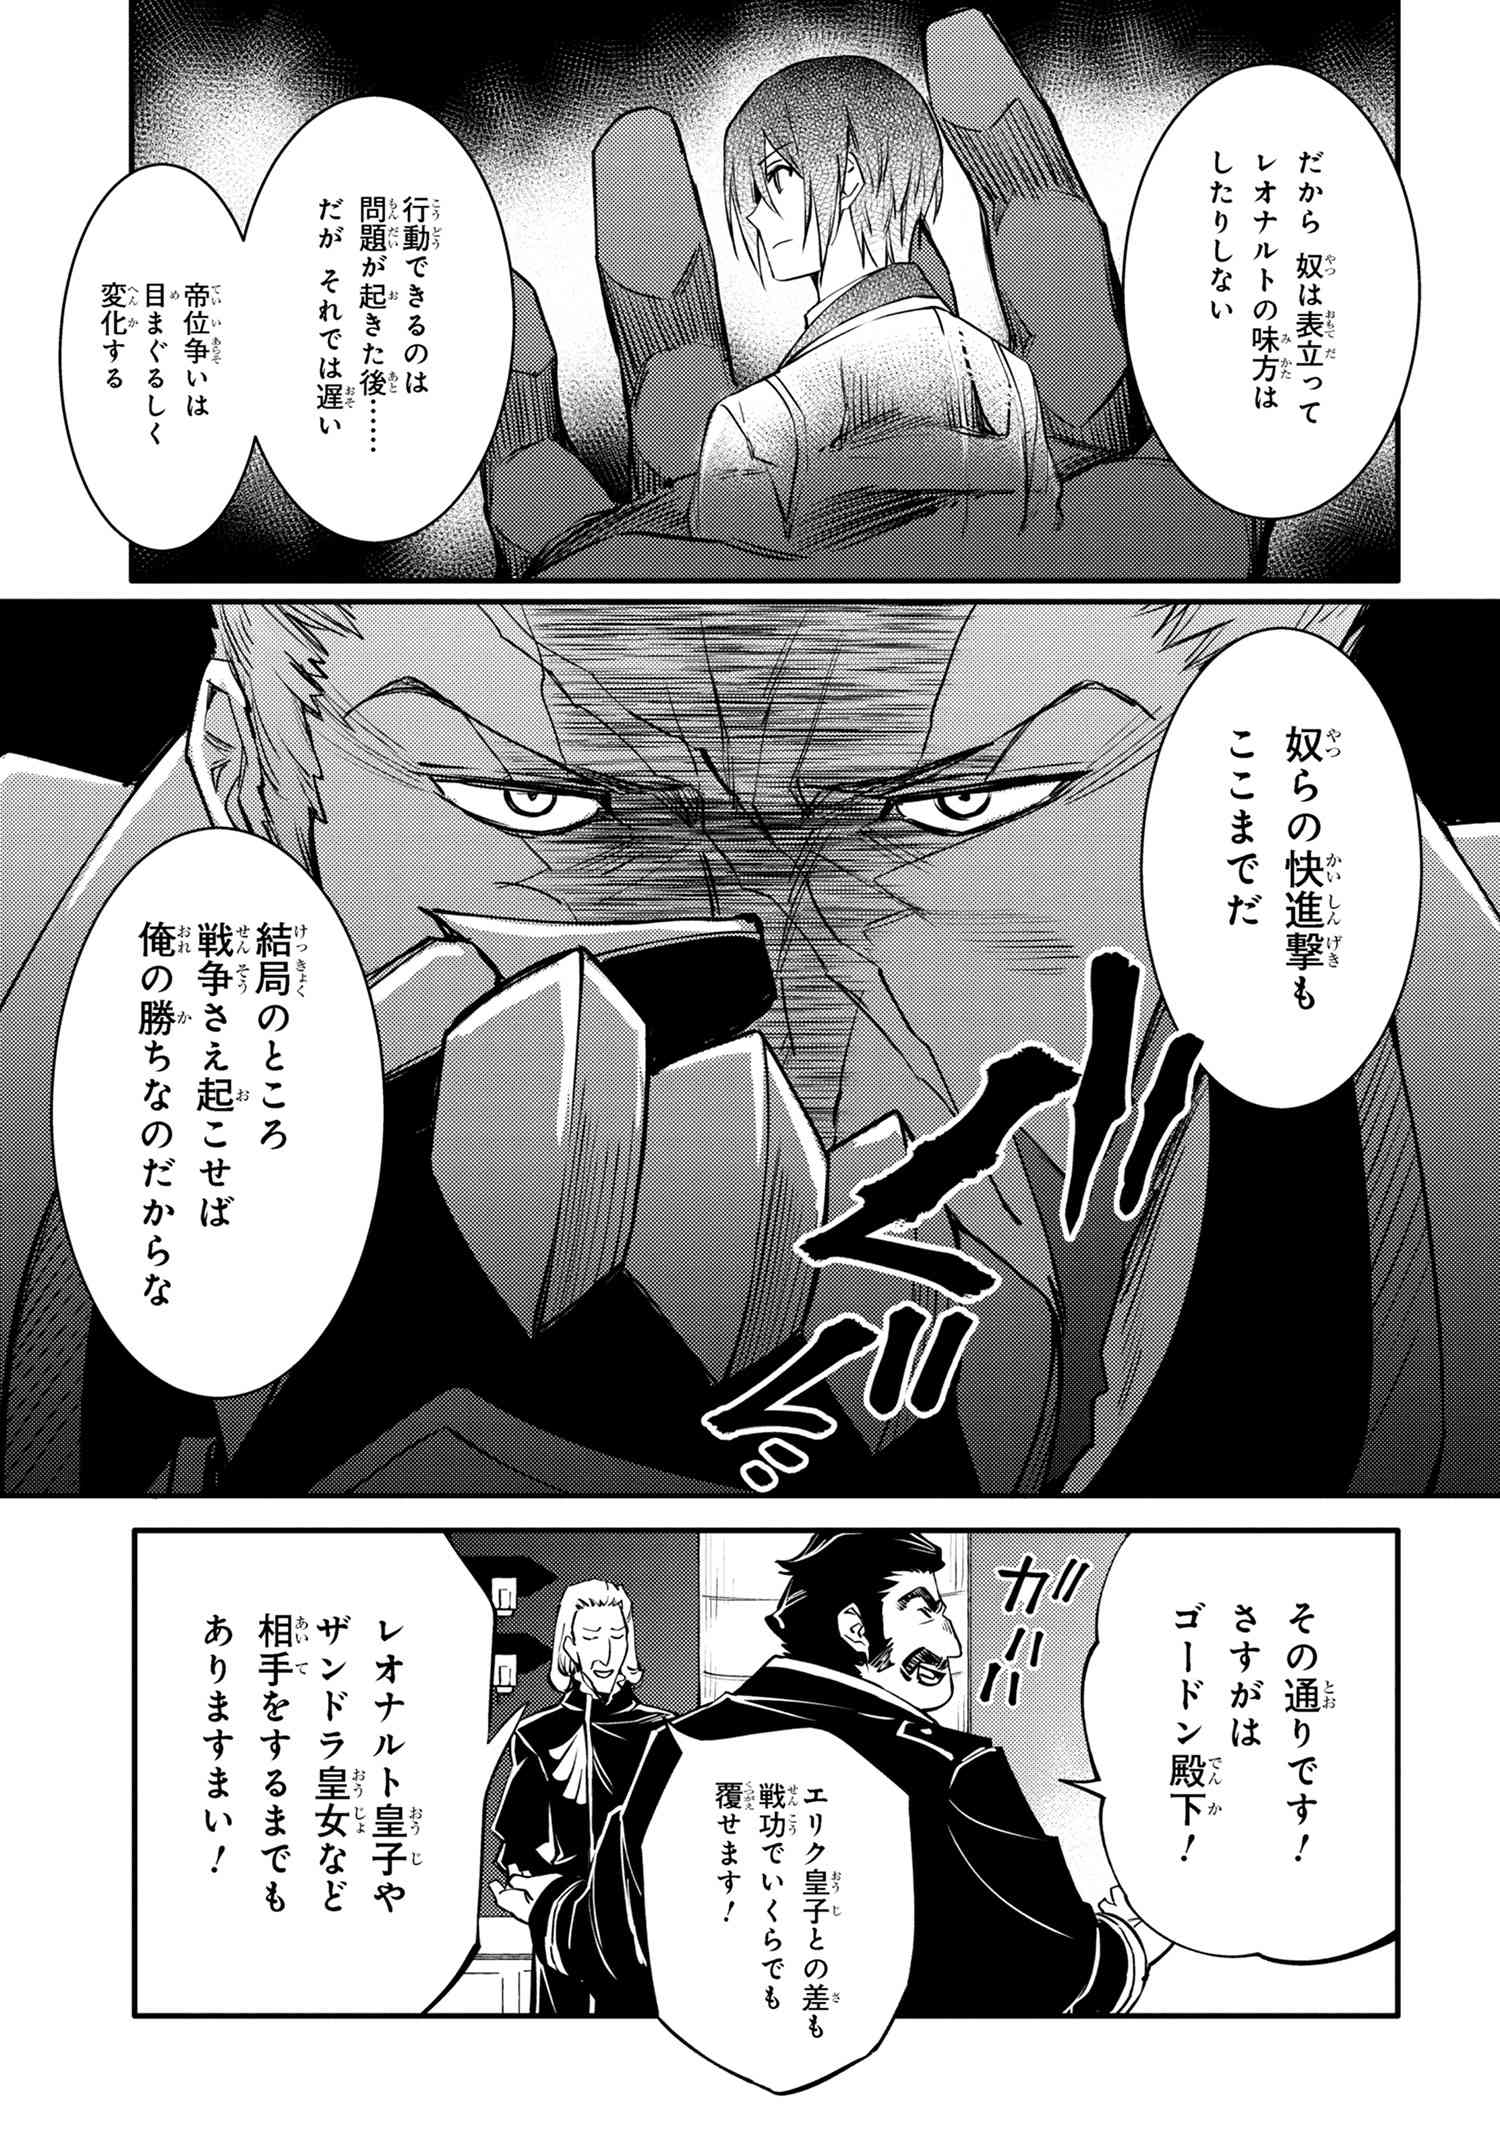 The Strongest Dull Prince’s Secret Battle for the Throne - Chapter 38.2 - Page 4